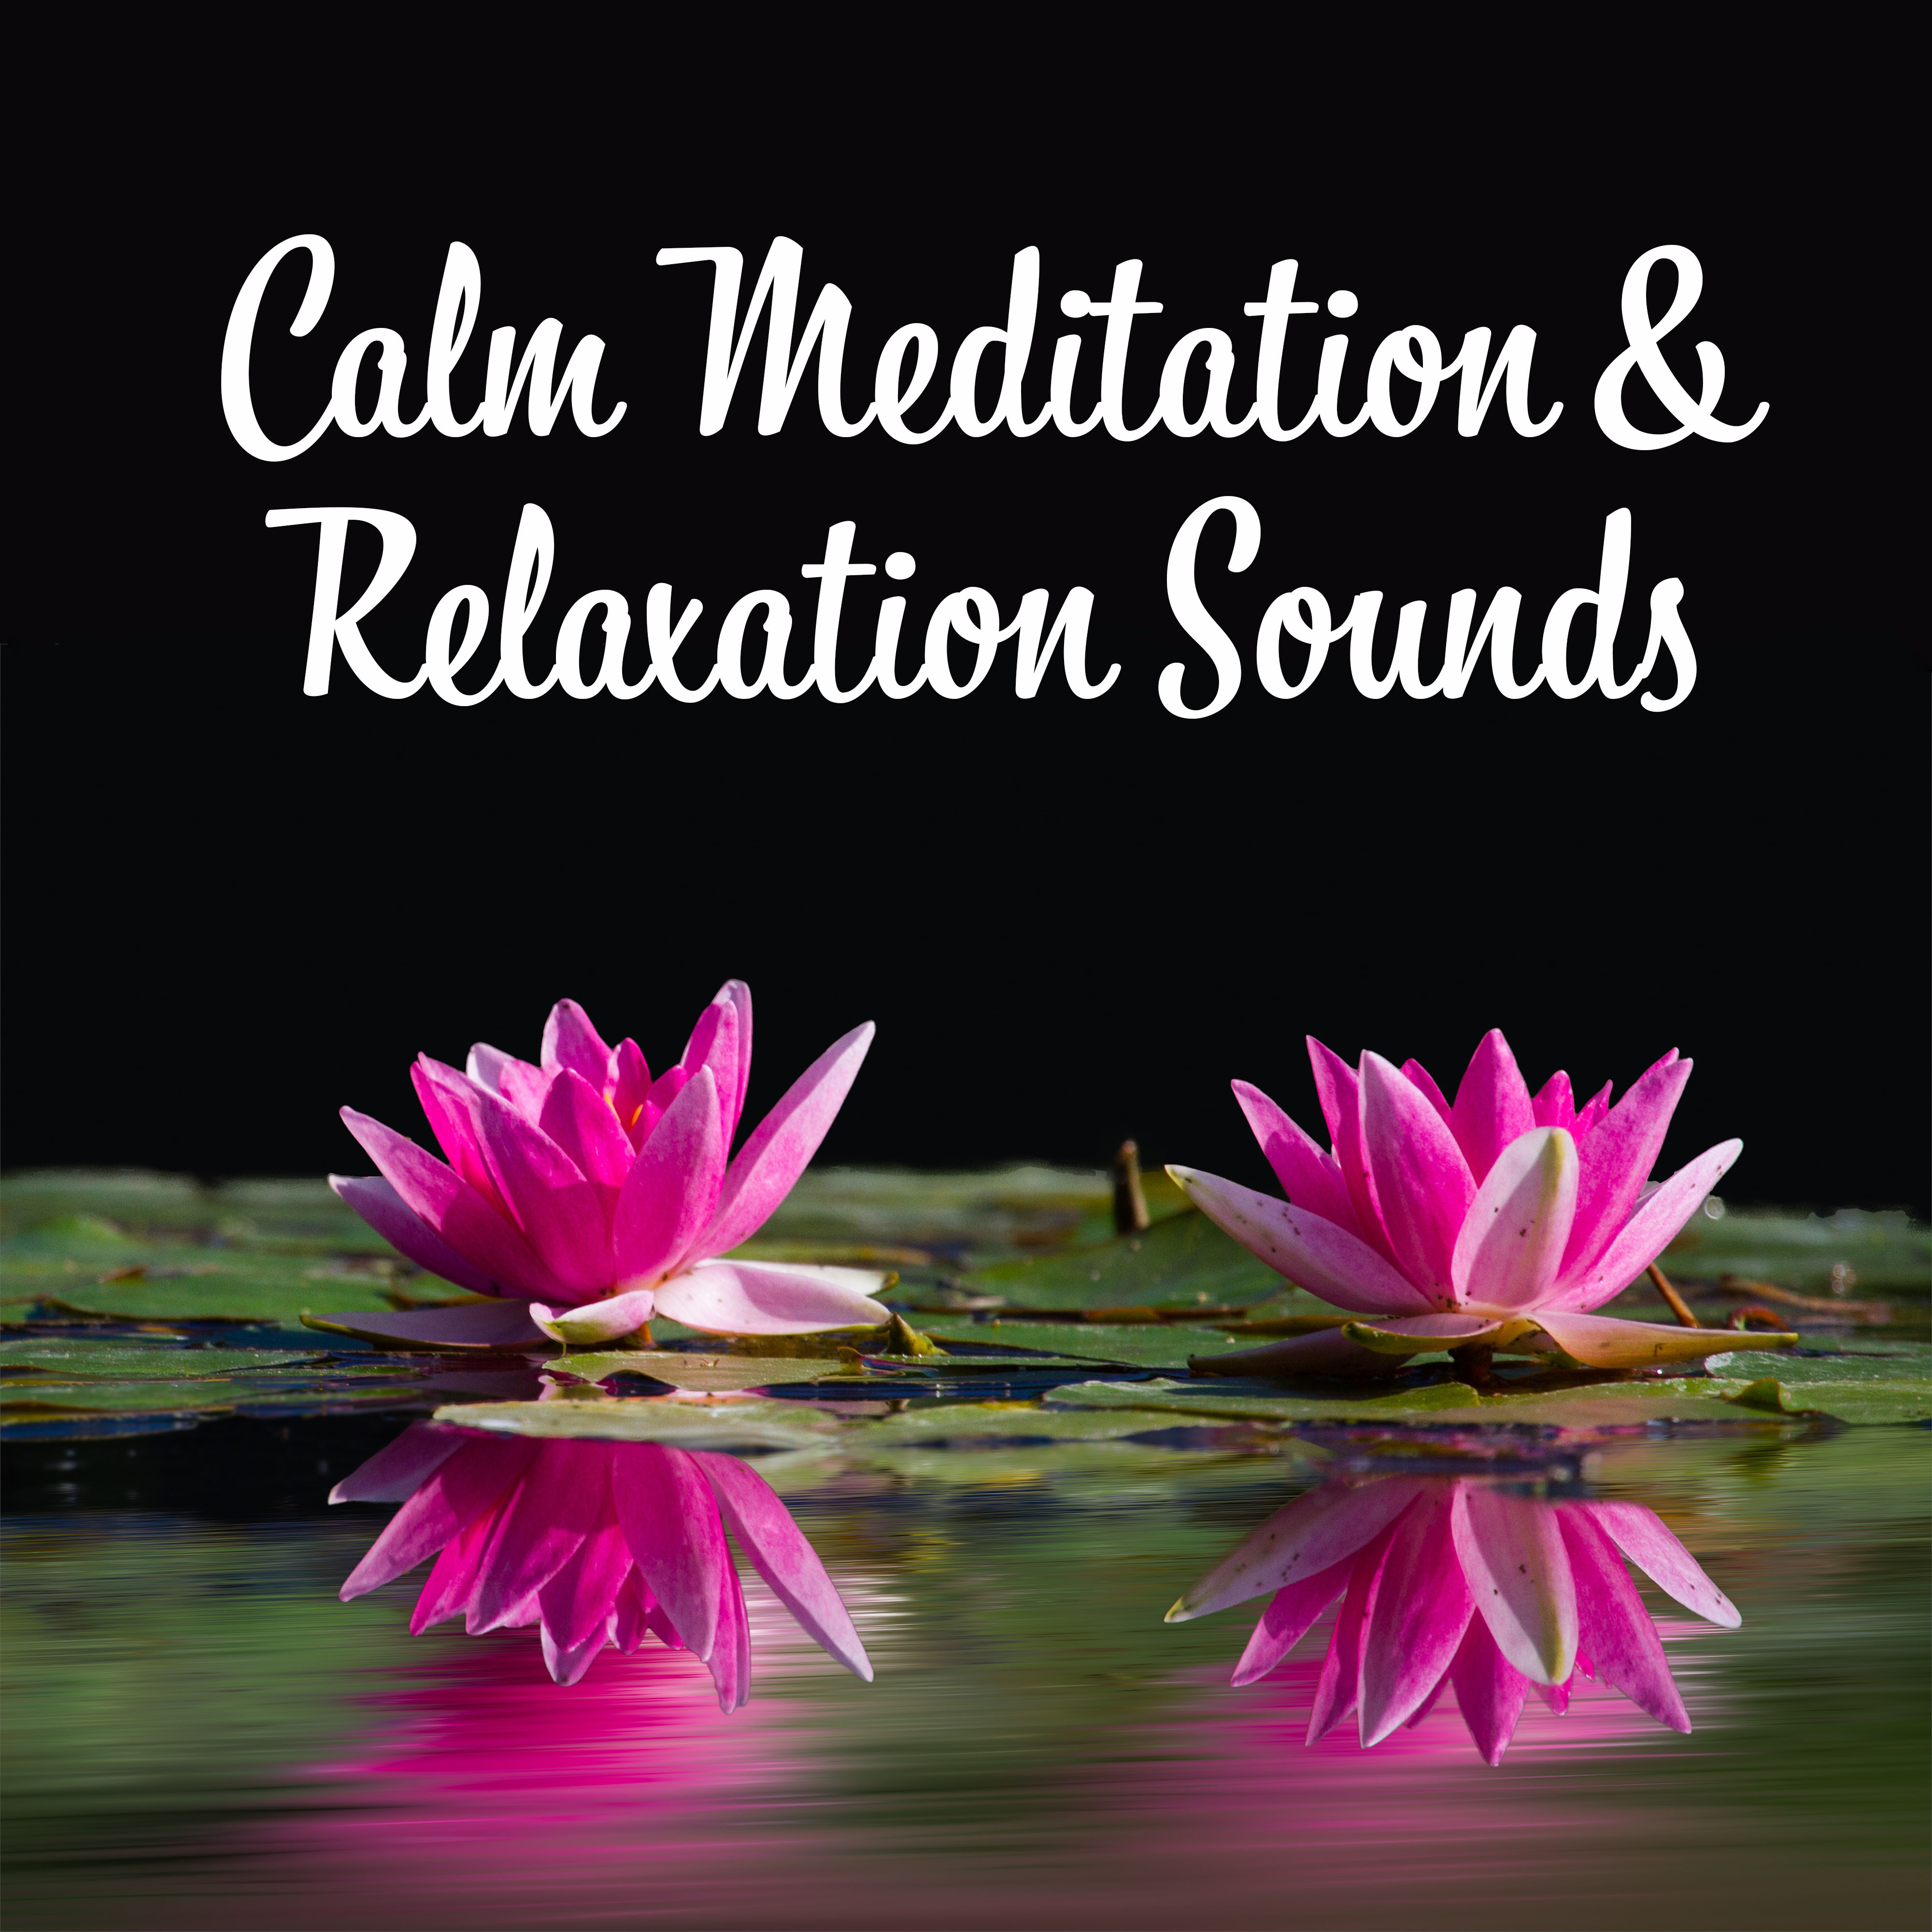 Calm Meditation & Relaxation Sounds – Buddha Lounge, New Age Music to Meditate, Peaceful Waves, Easy Listening